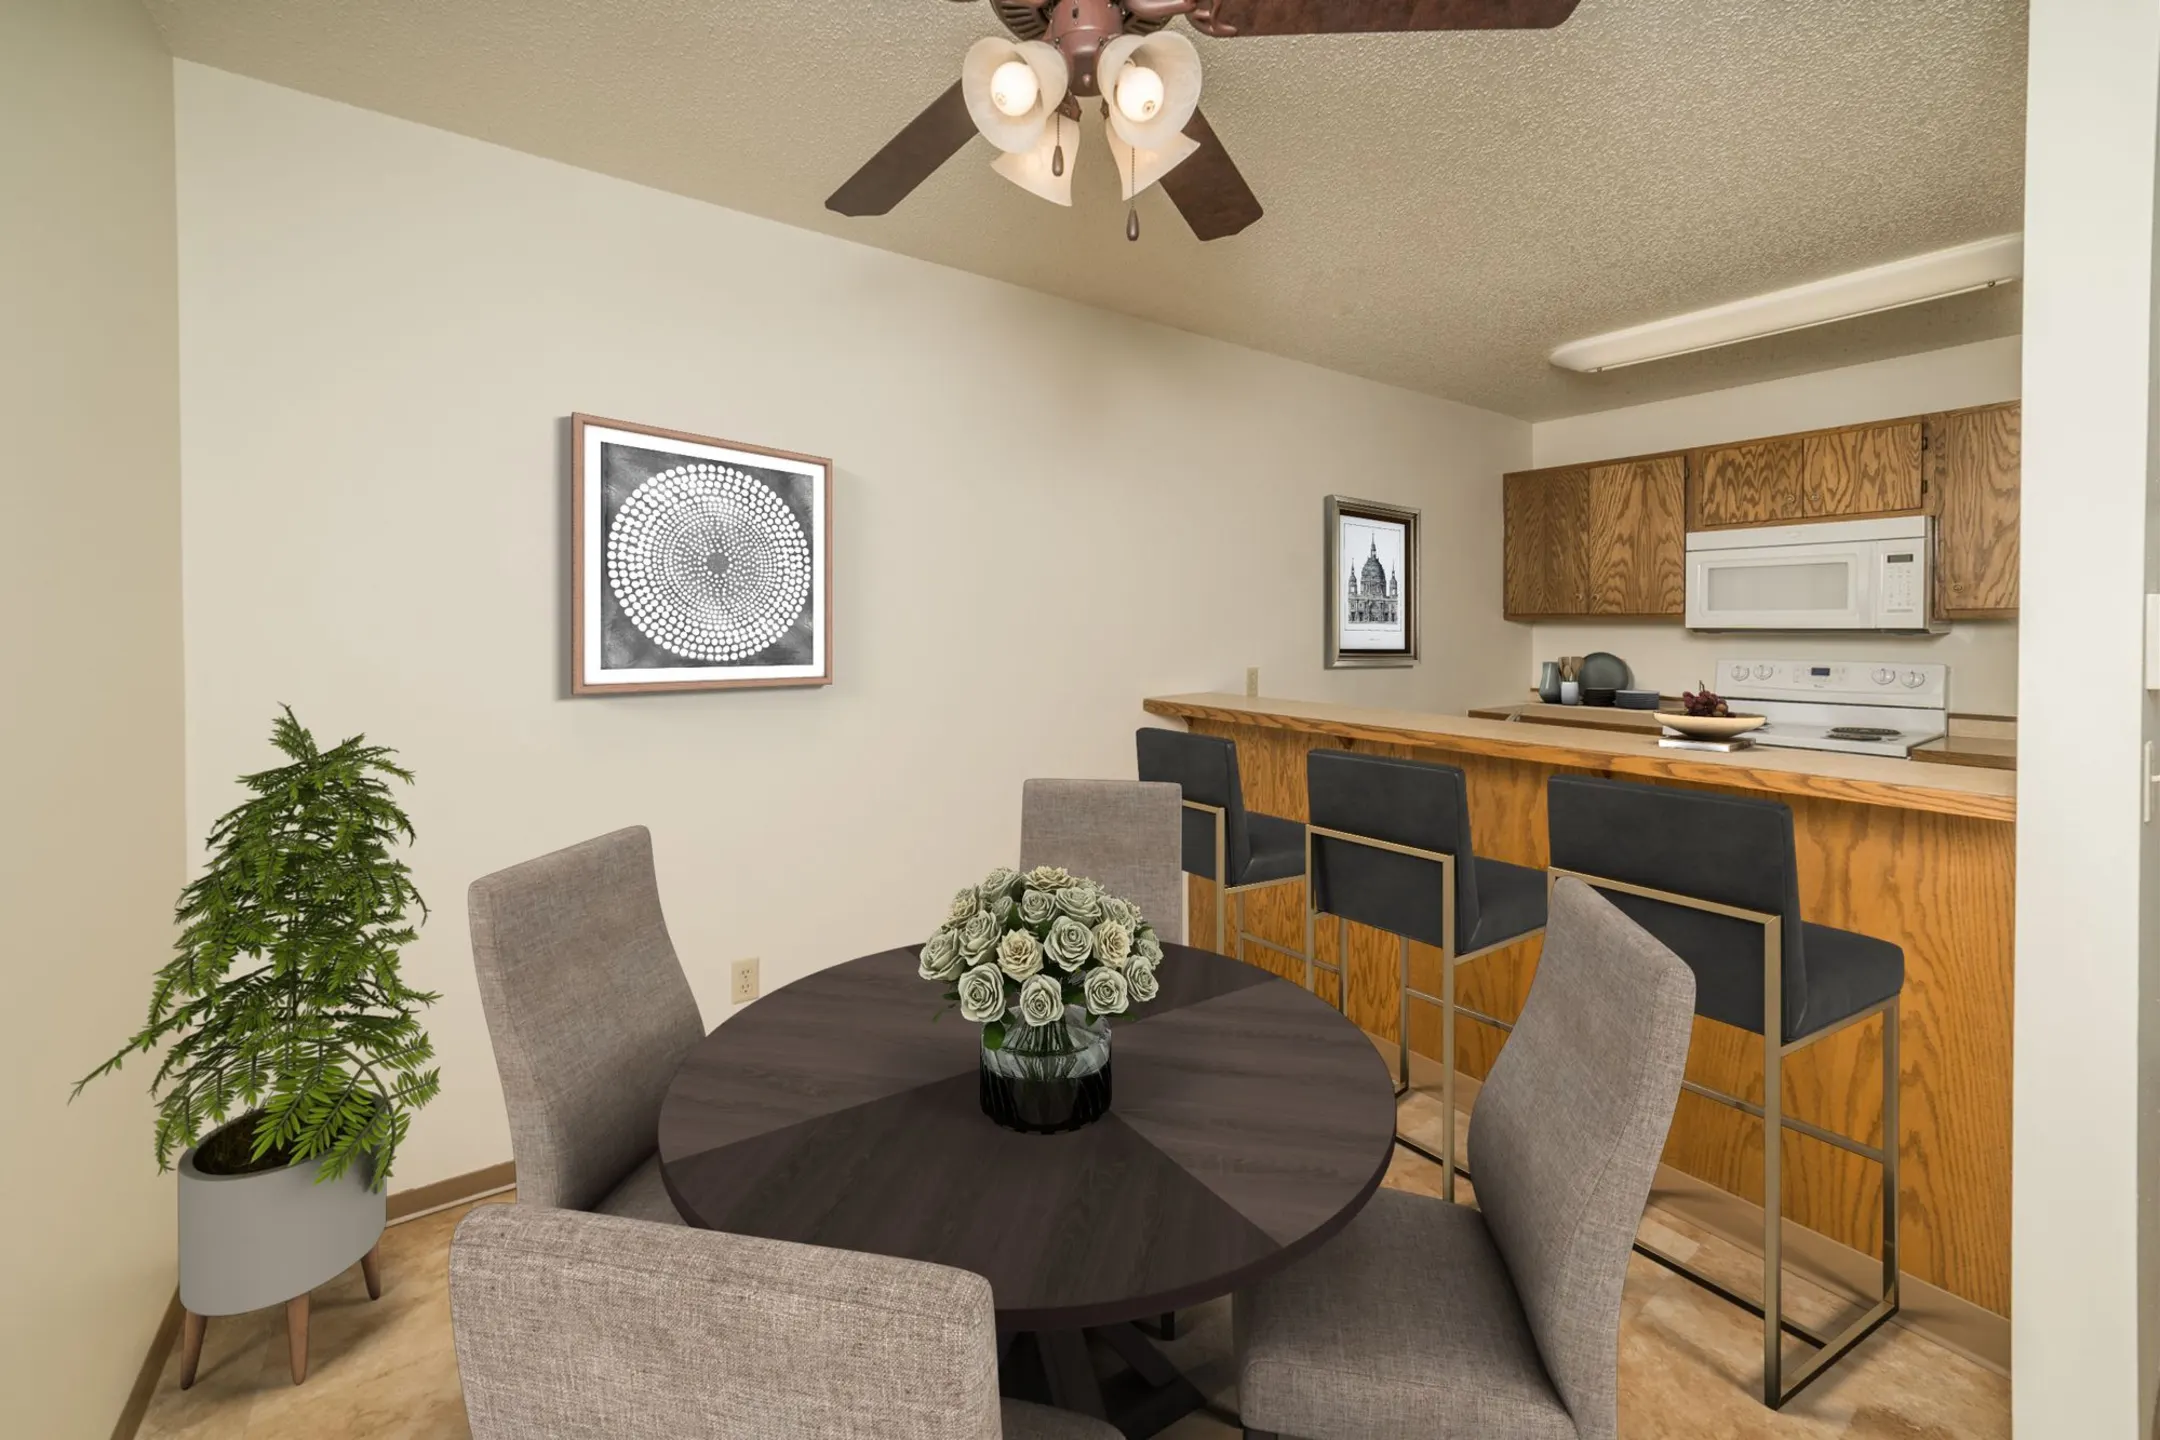 Dining Room - Terrace Hills Apartments - Sioux Falls, SD